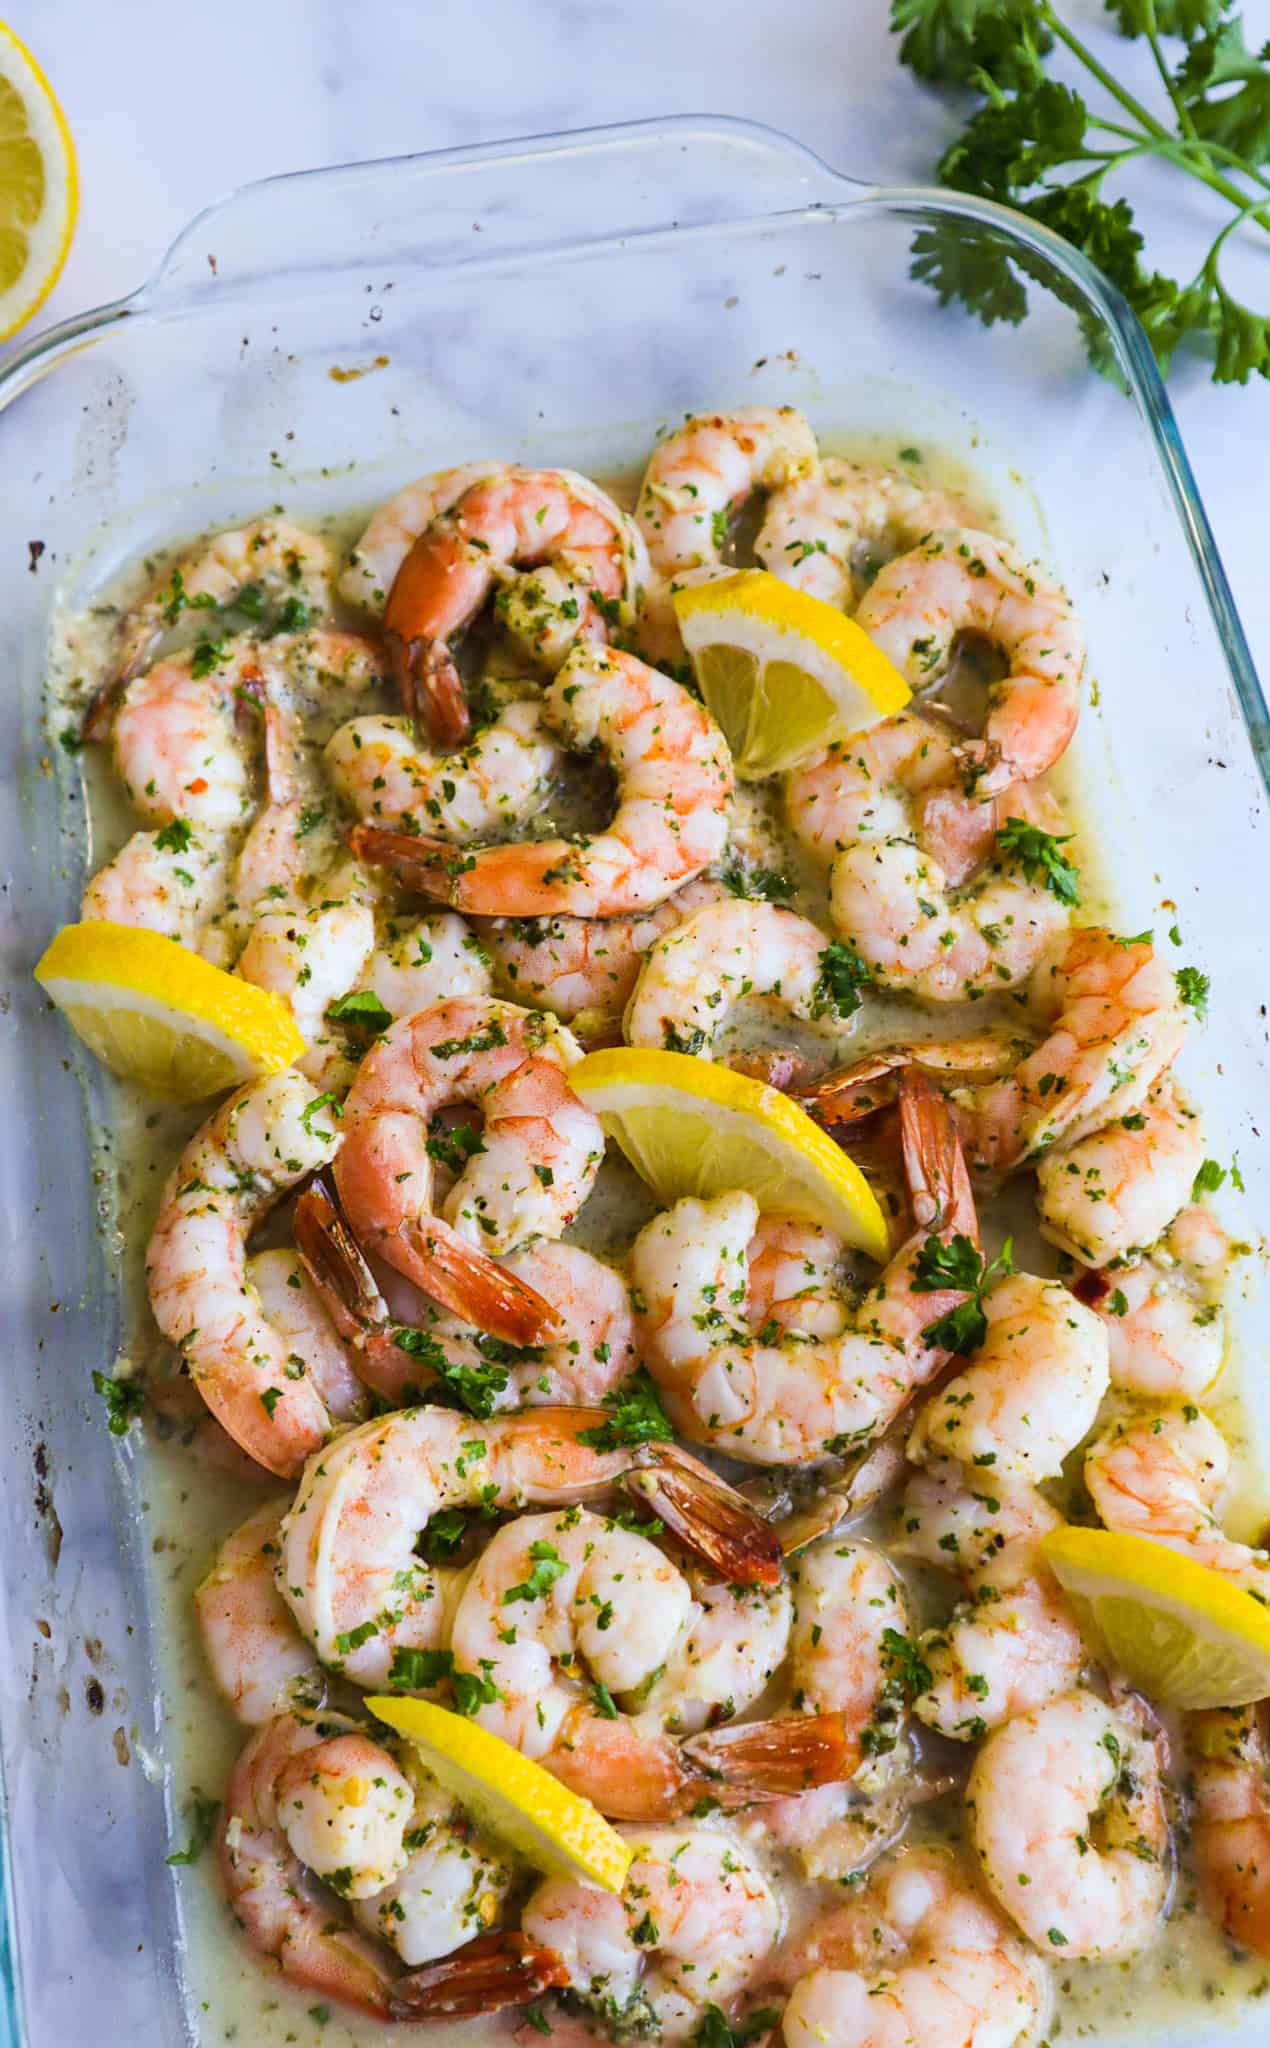 An oven baked shrimp in a pyrex with lemon slices and parsley as garnish